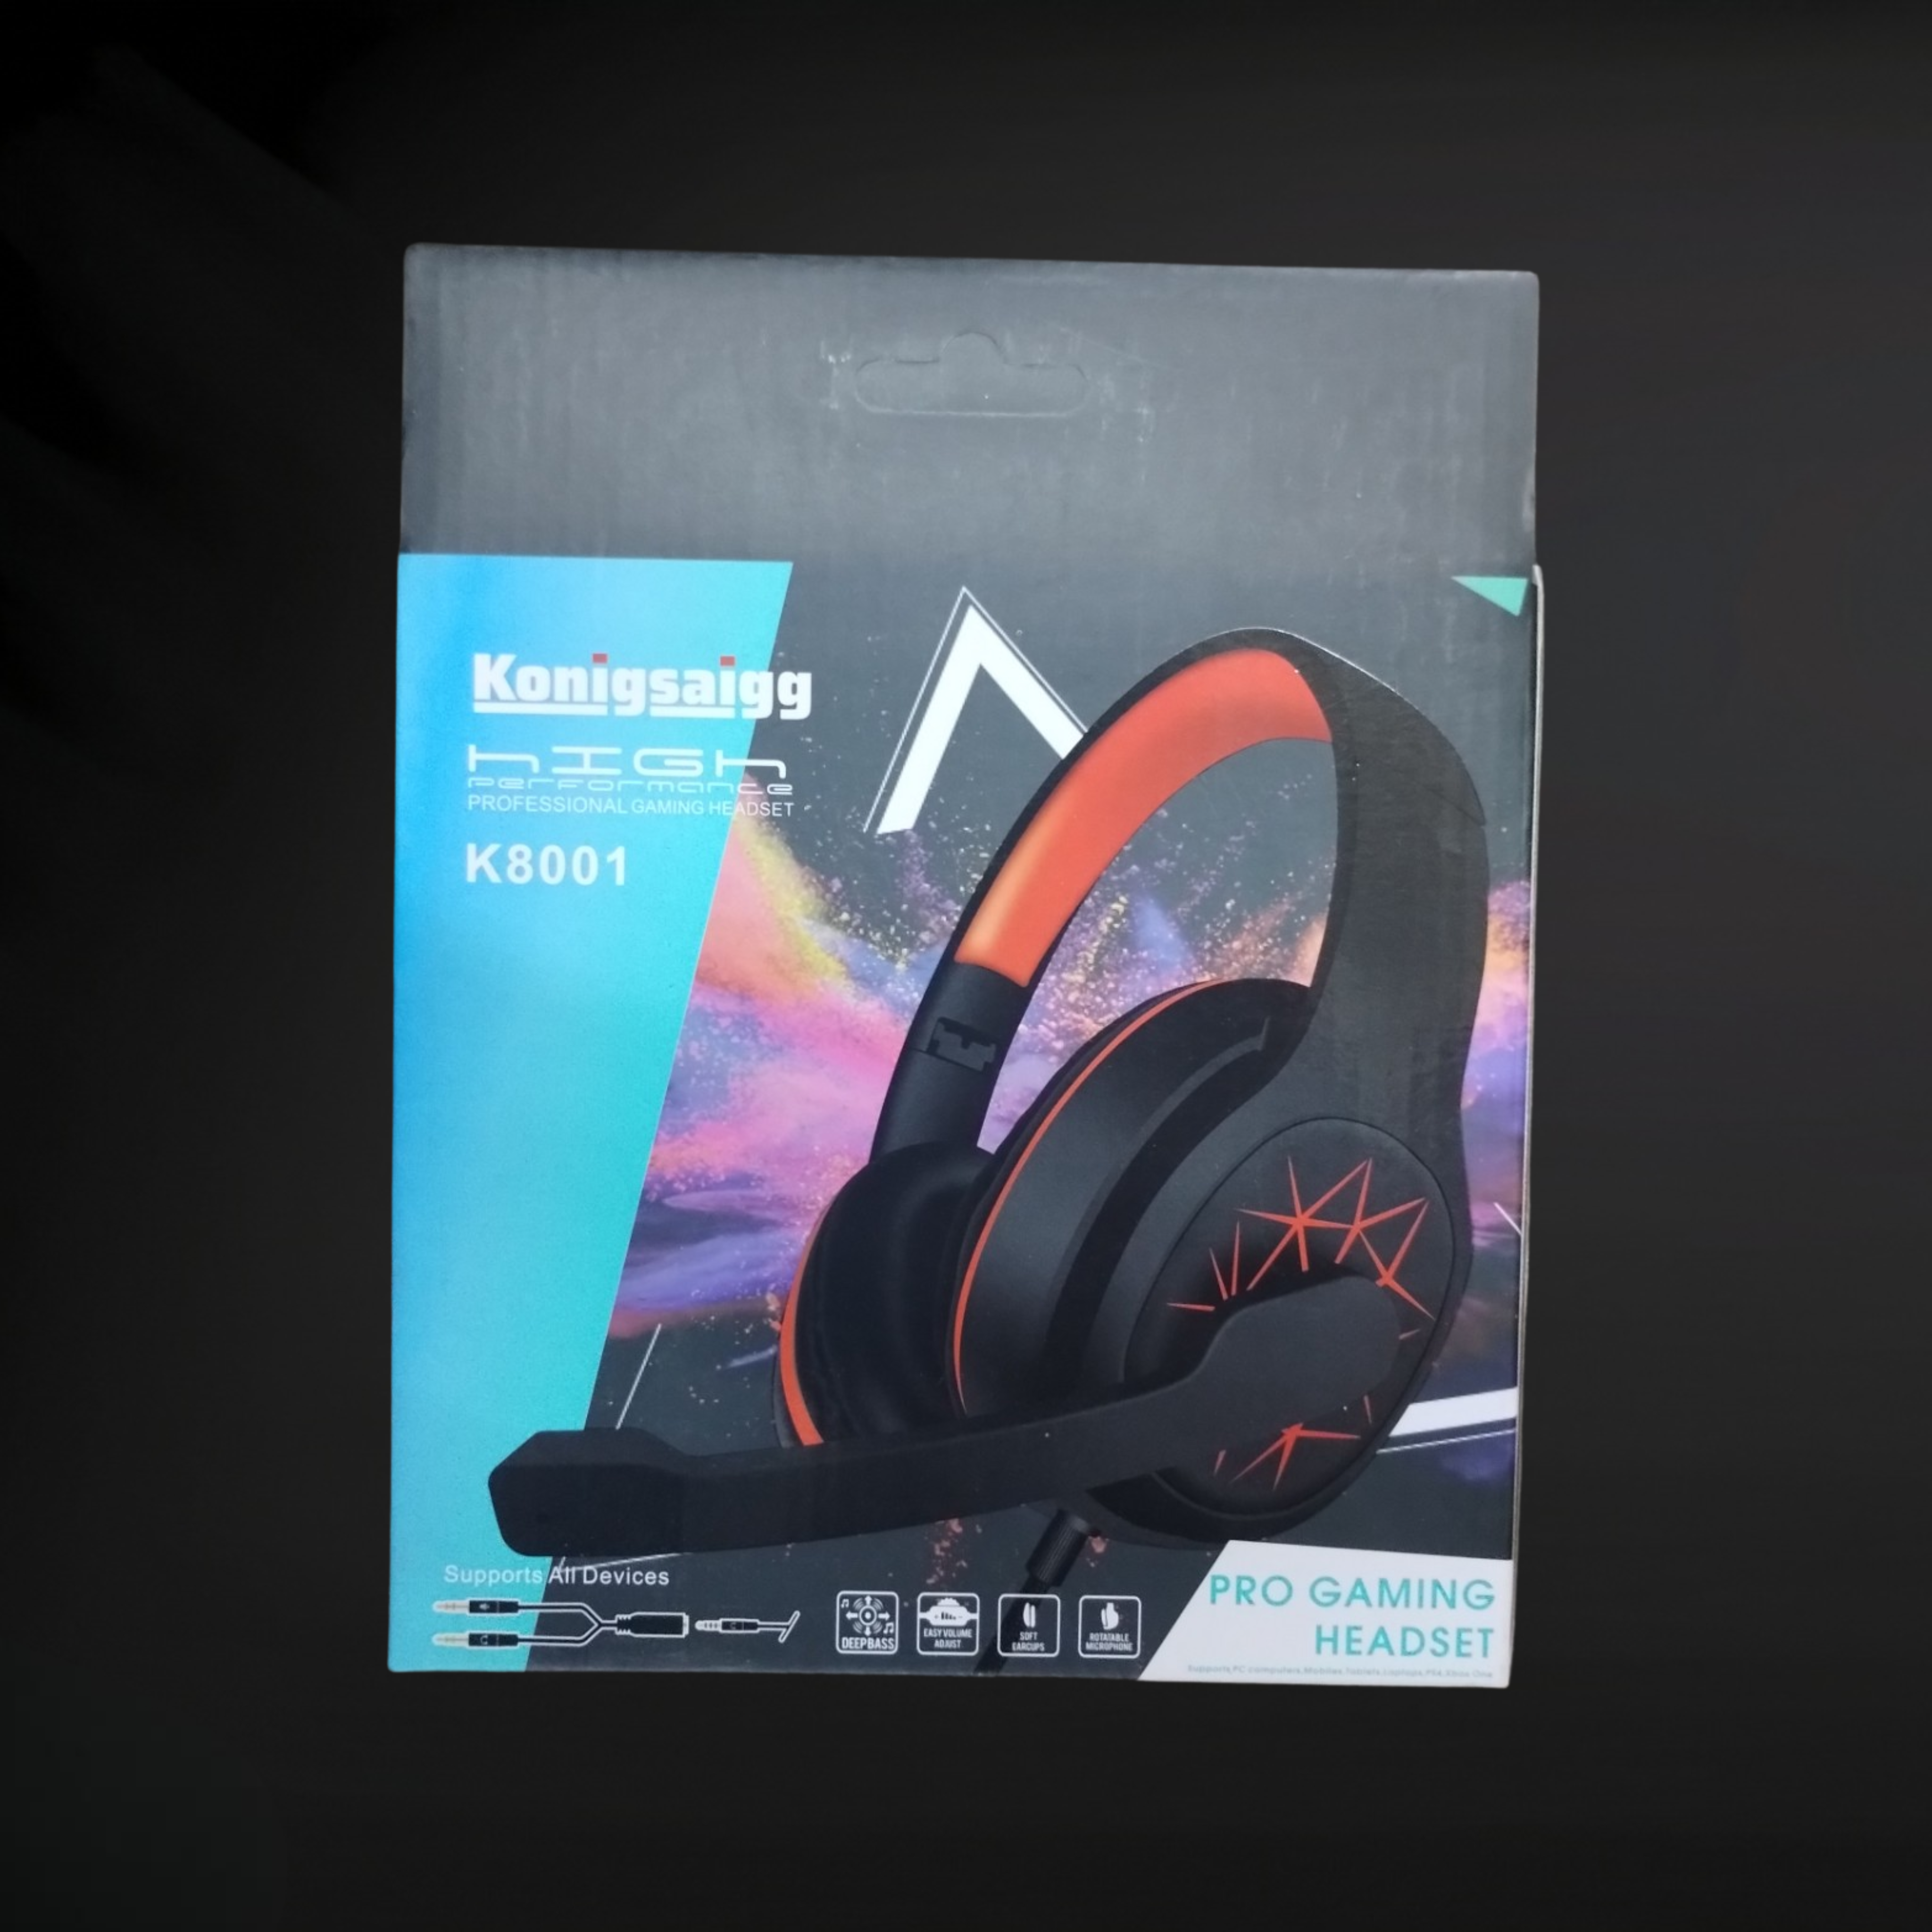 Konigsaigg Gaming Headset with Mic - Red and Blue